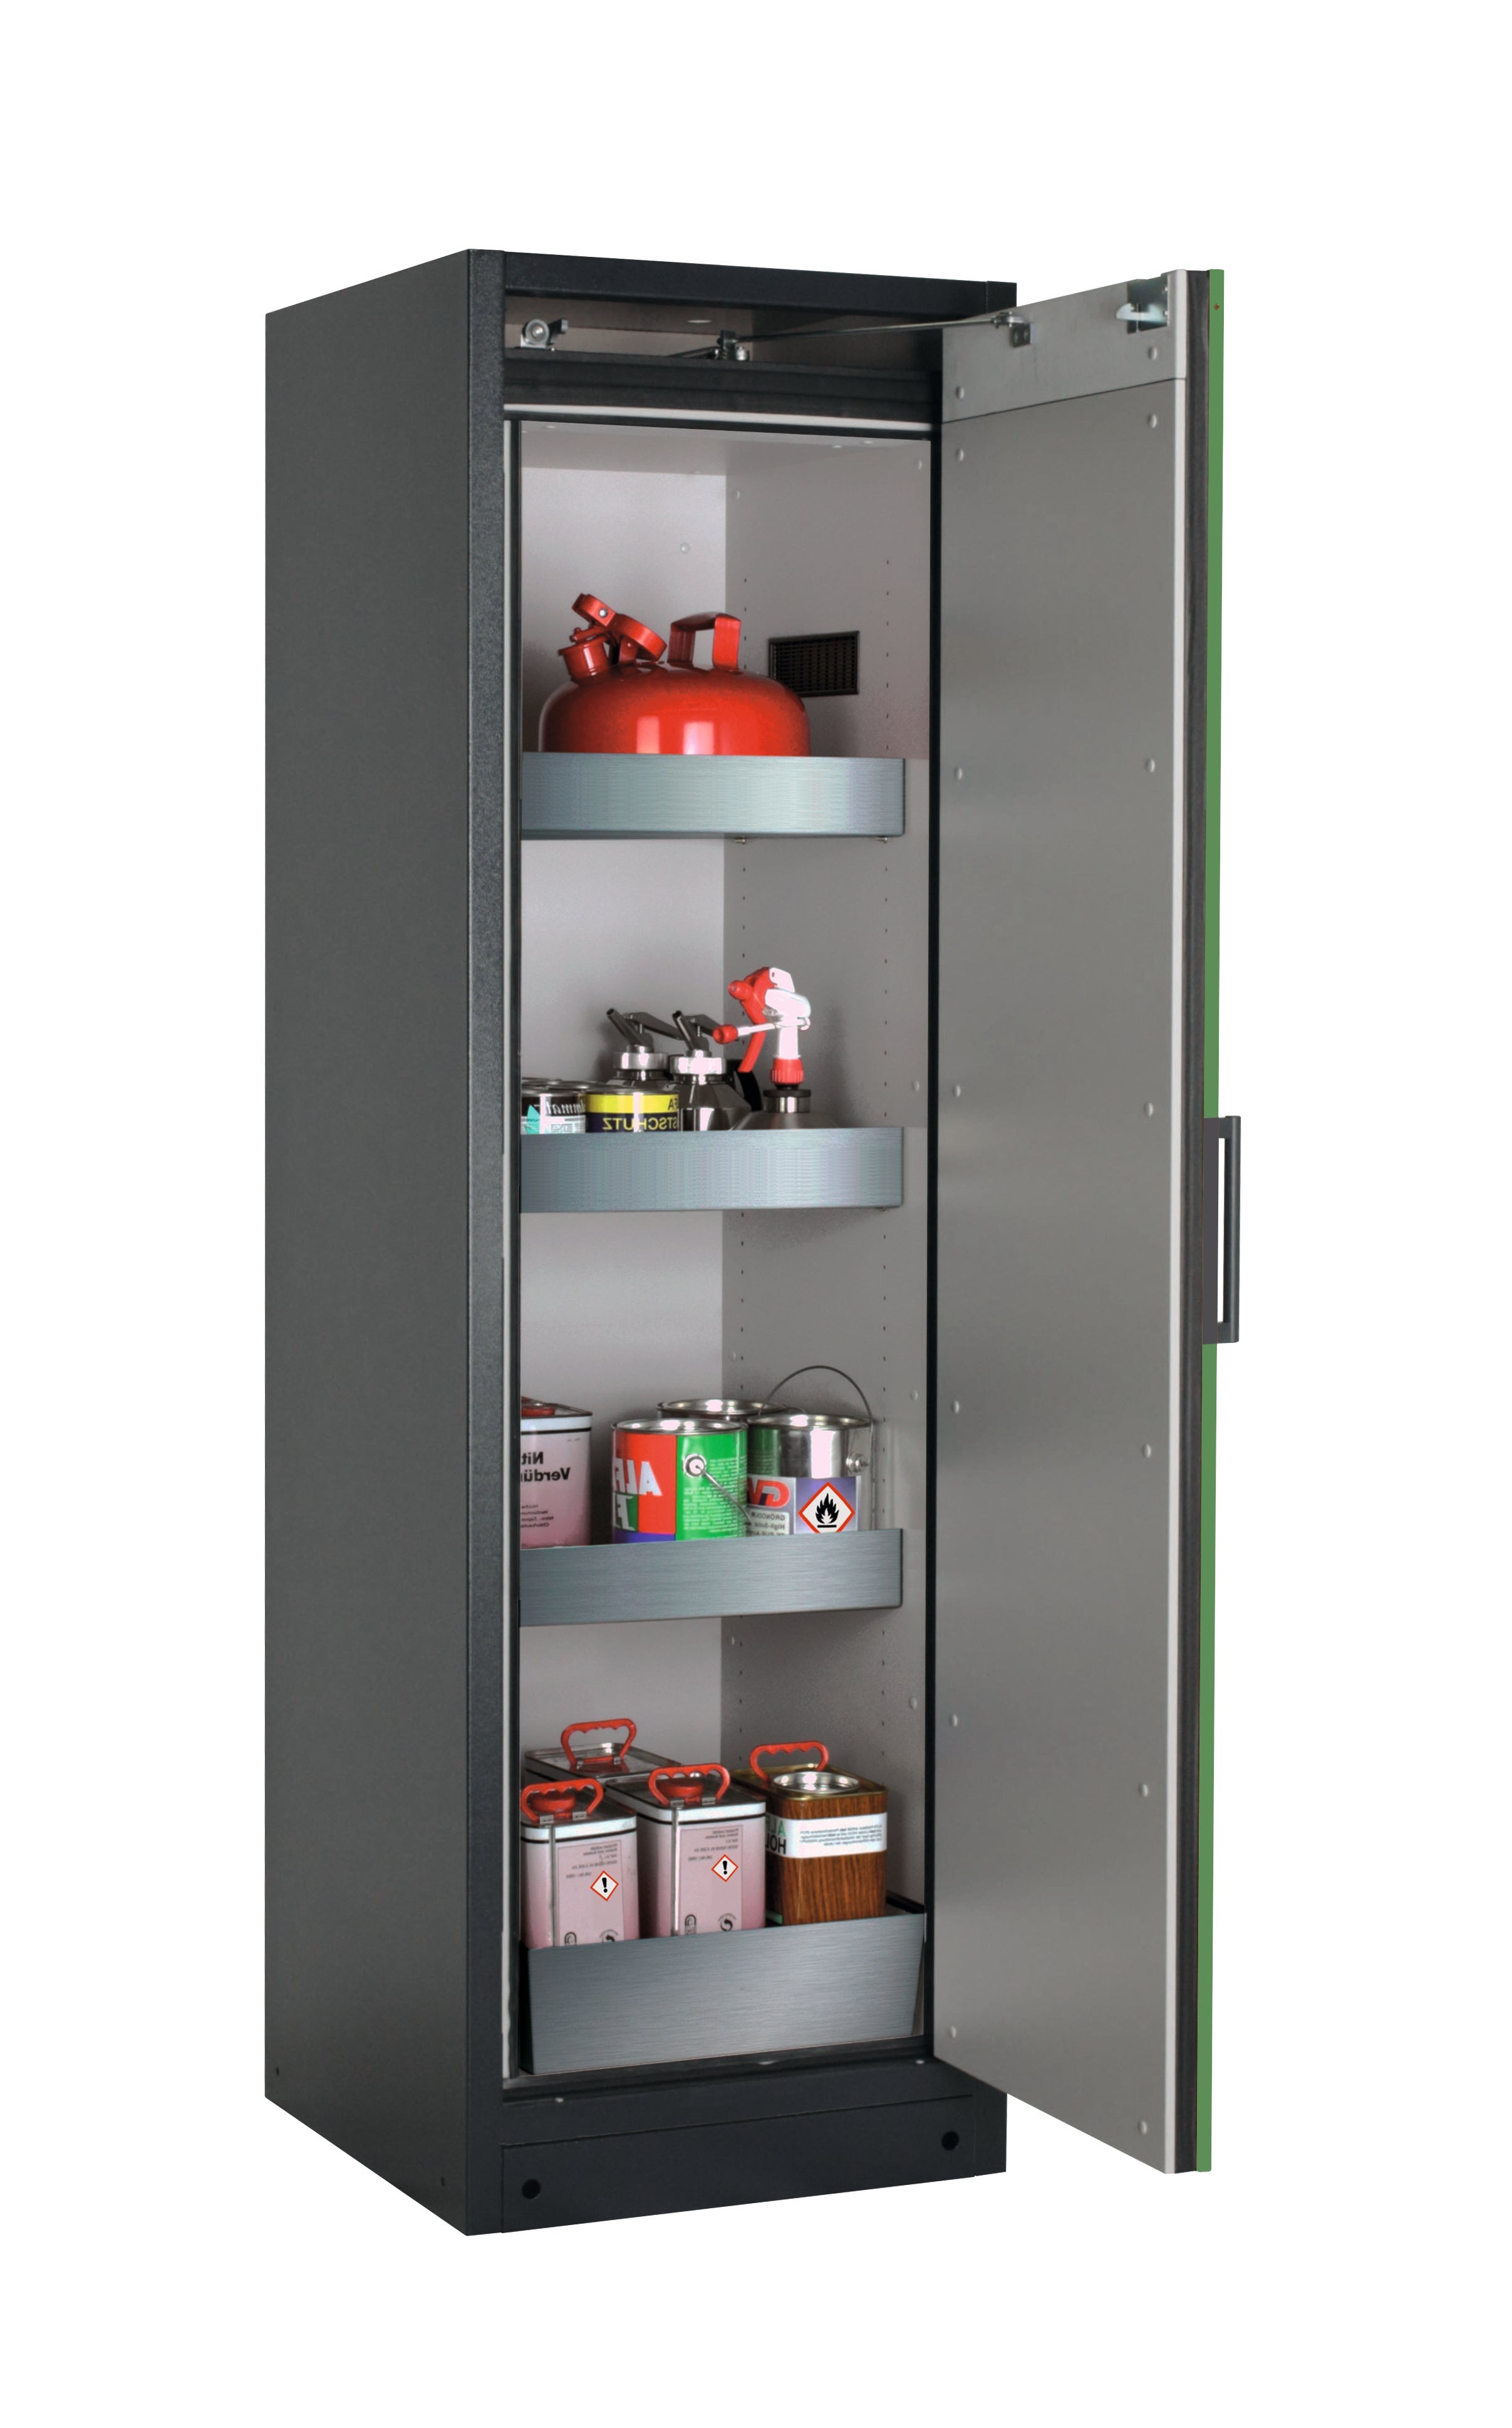 Type 90 safety storage cabinet Q-CLASSIC-90 model Q90.195.060.R in reseda green RAL 6011 with 3x tray shelf (standard) (stainless steel 1.4301),